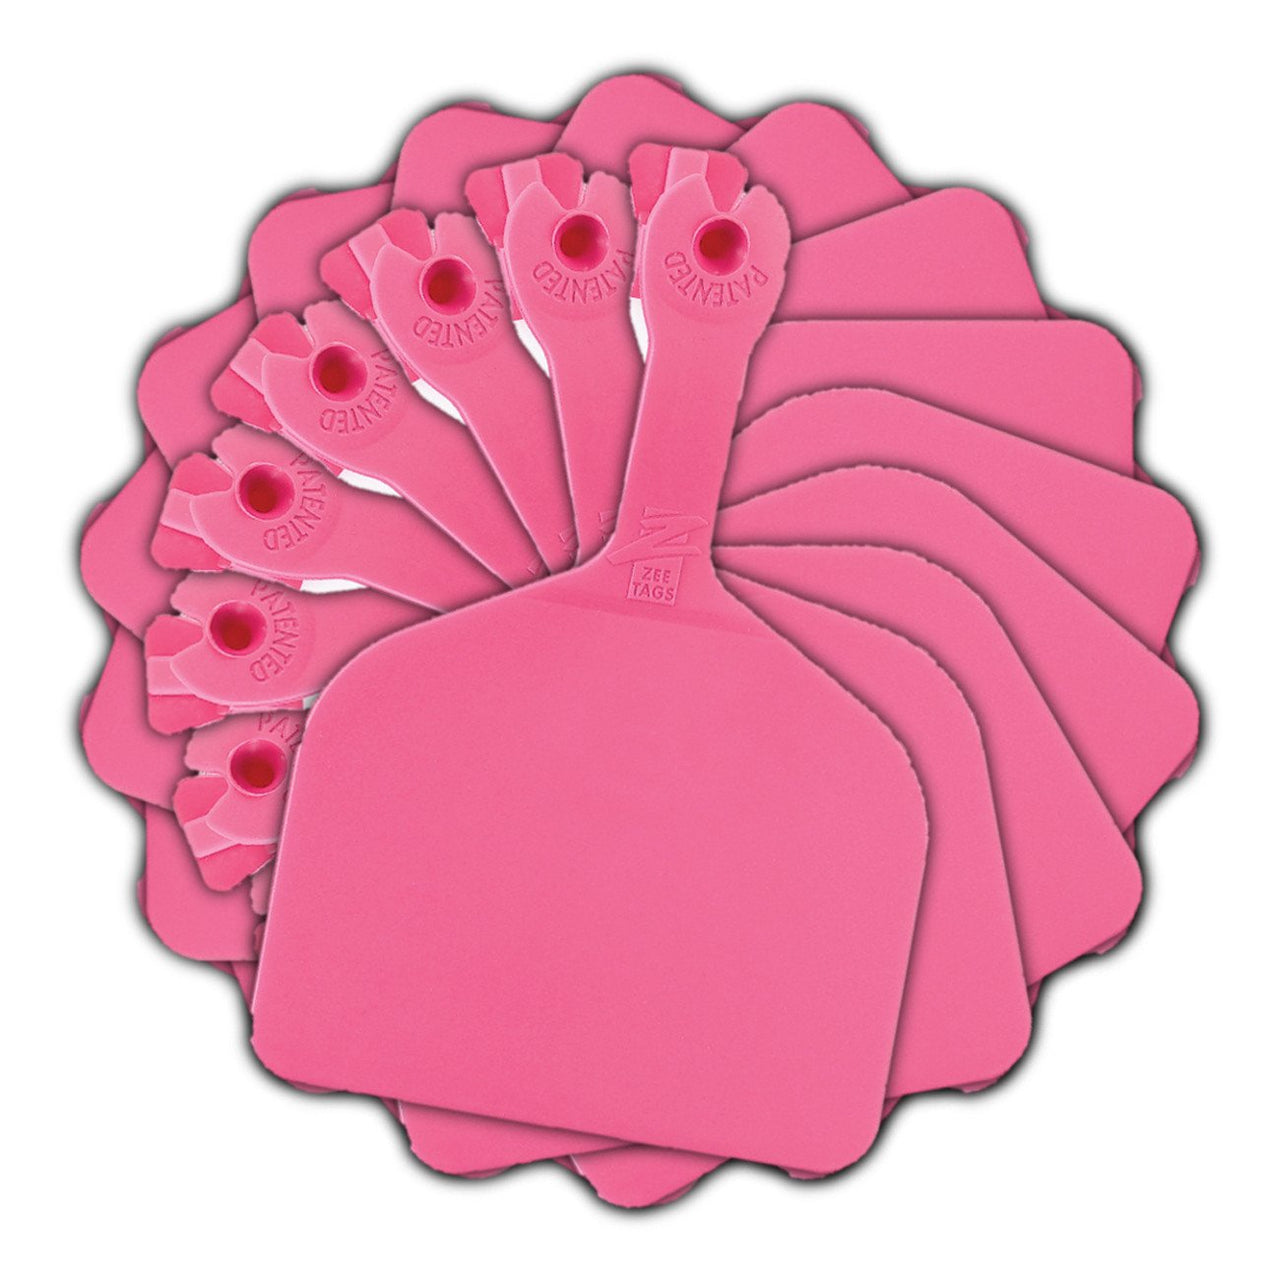 Z Tags Feedlot Blank - Pink (50 Pack) - Feedlot Tags Blank Z Tags - Canada